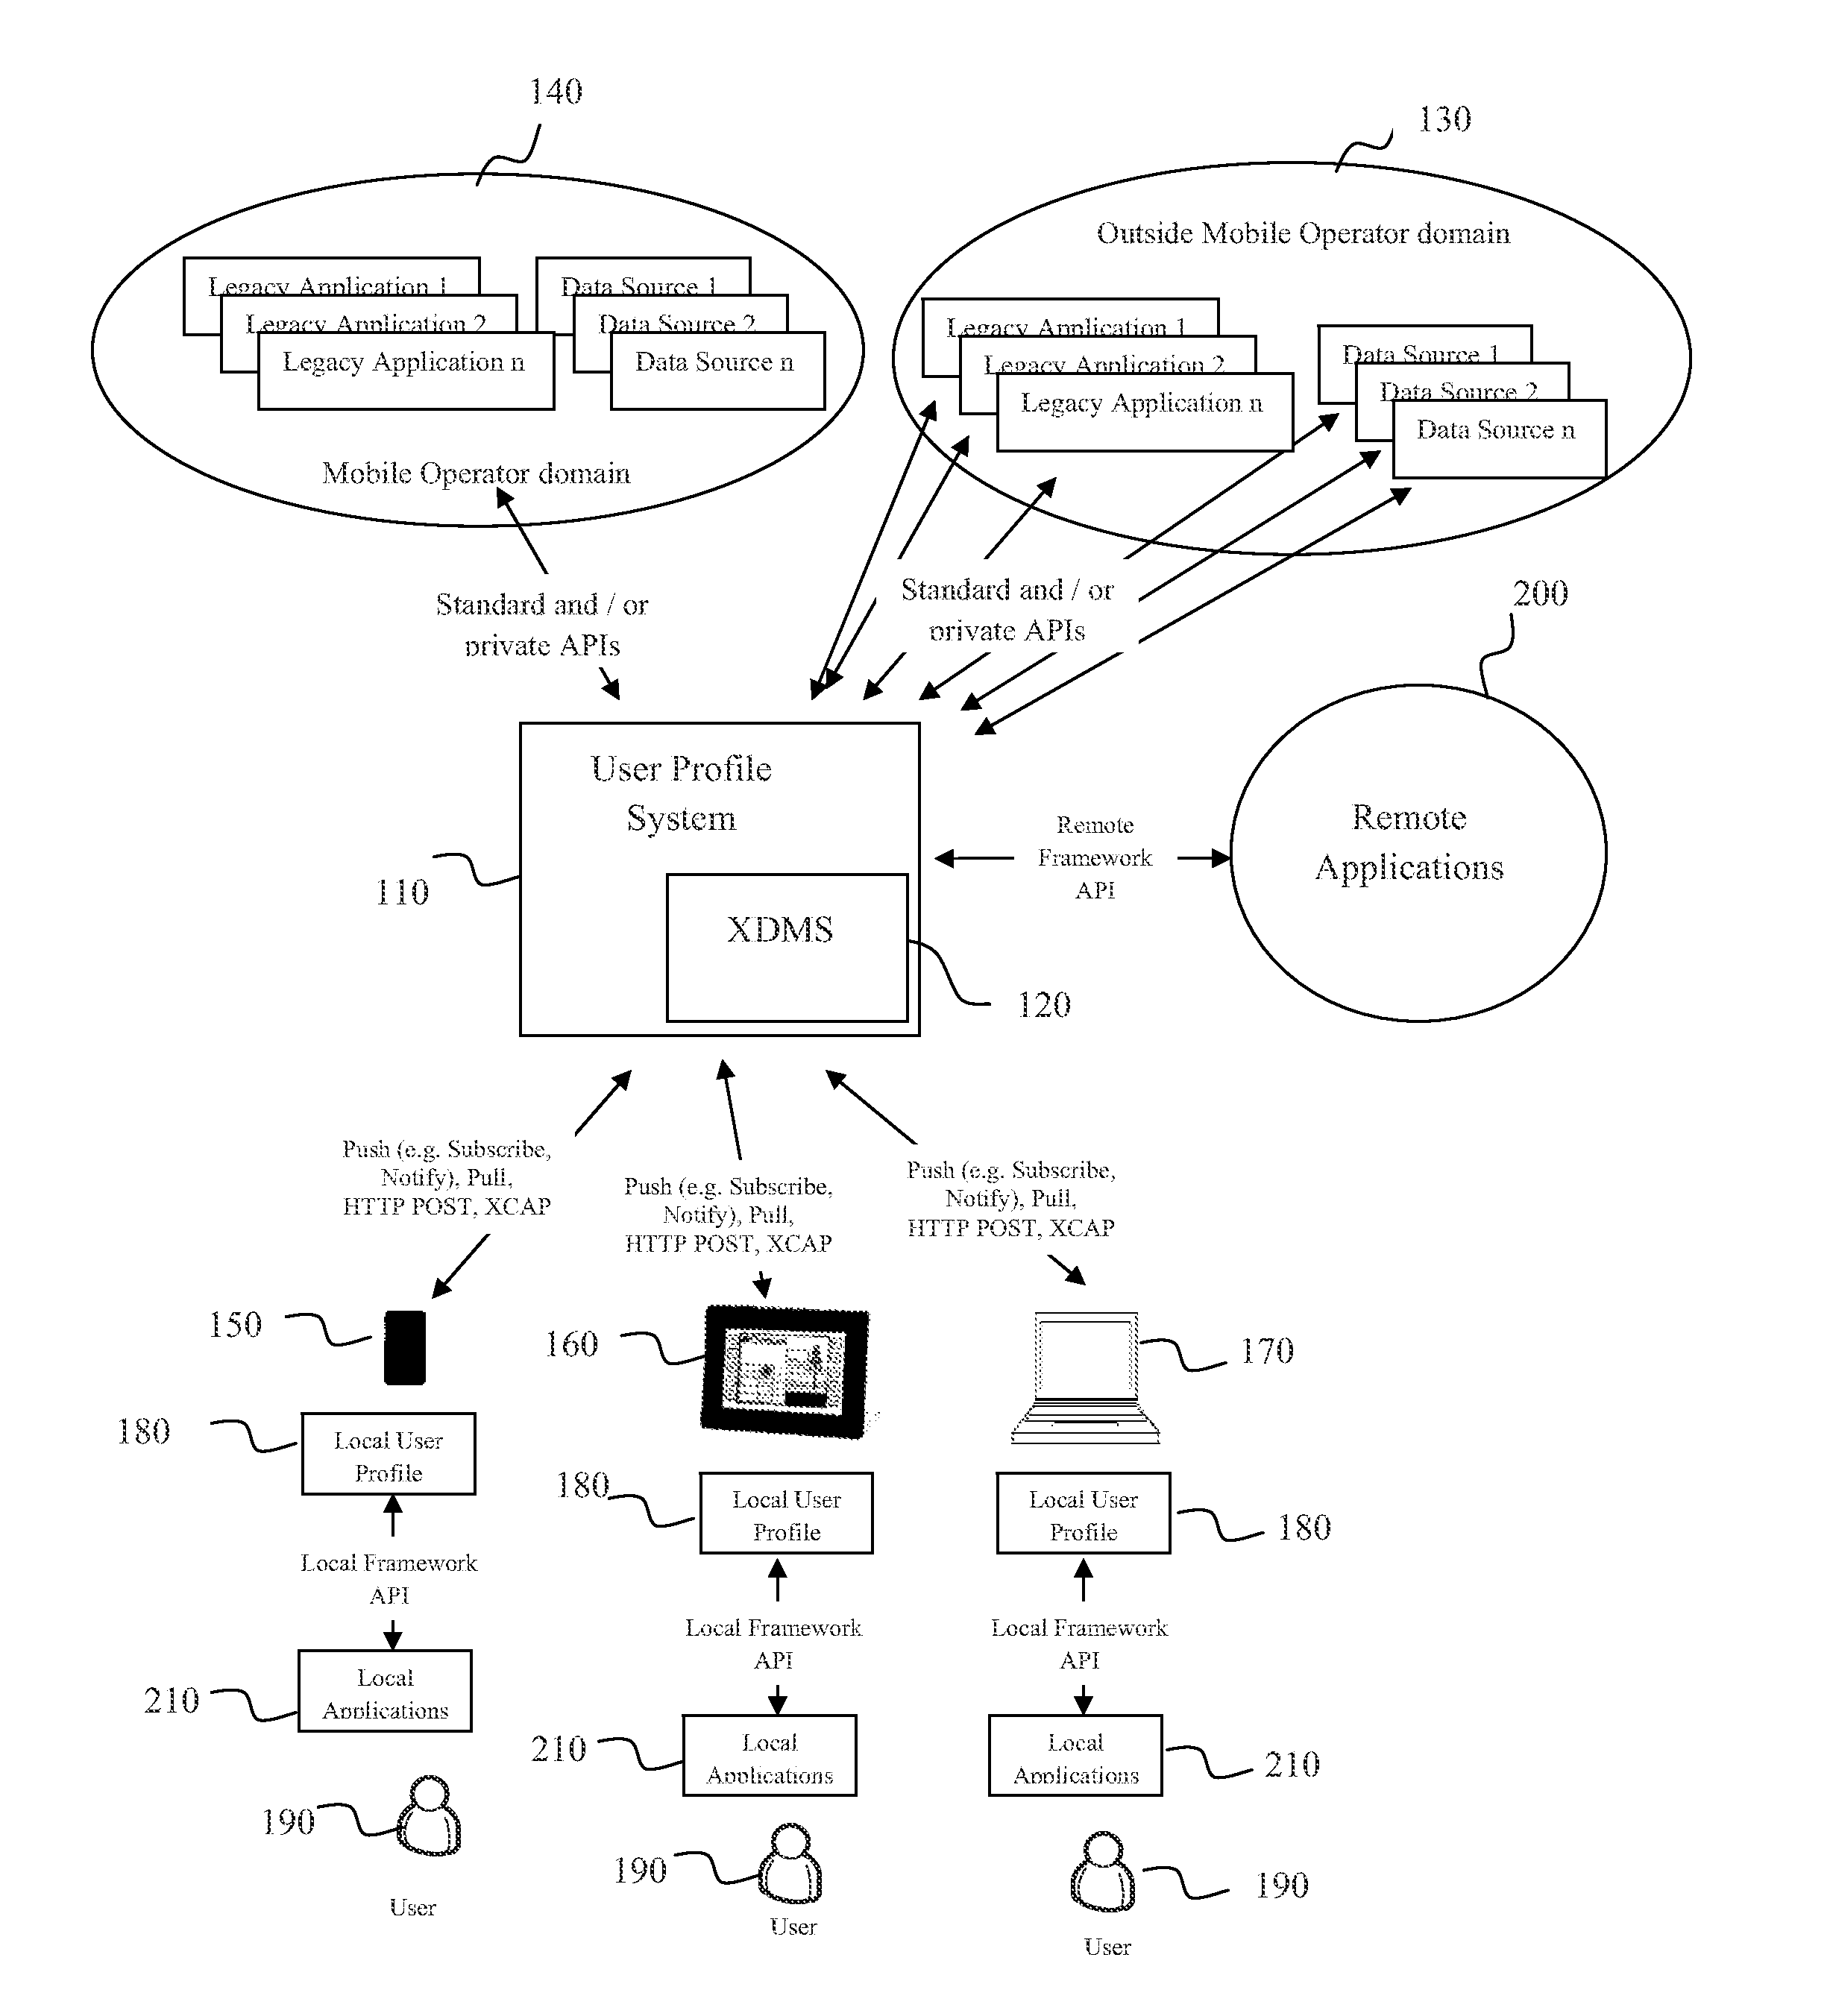 Migration framework and related methods for devices based on profile data and associated automatic updates